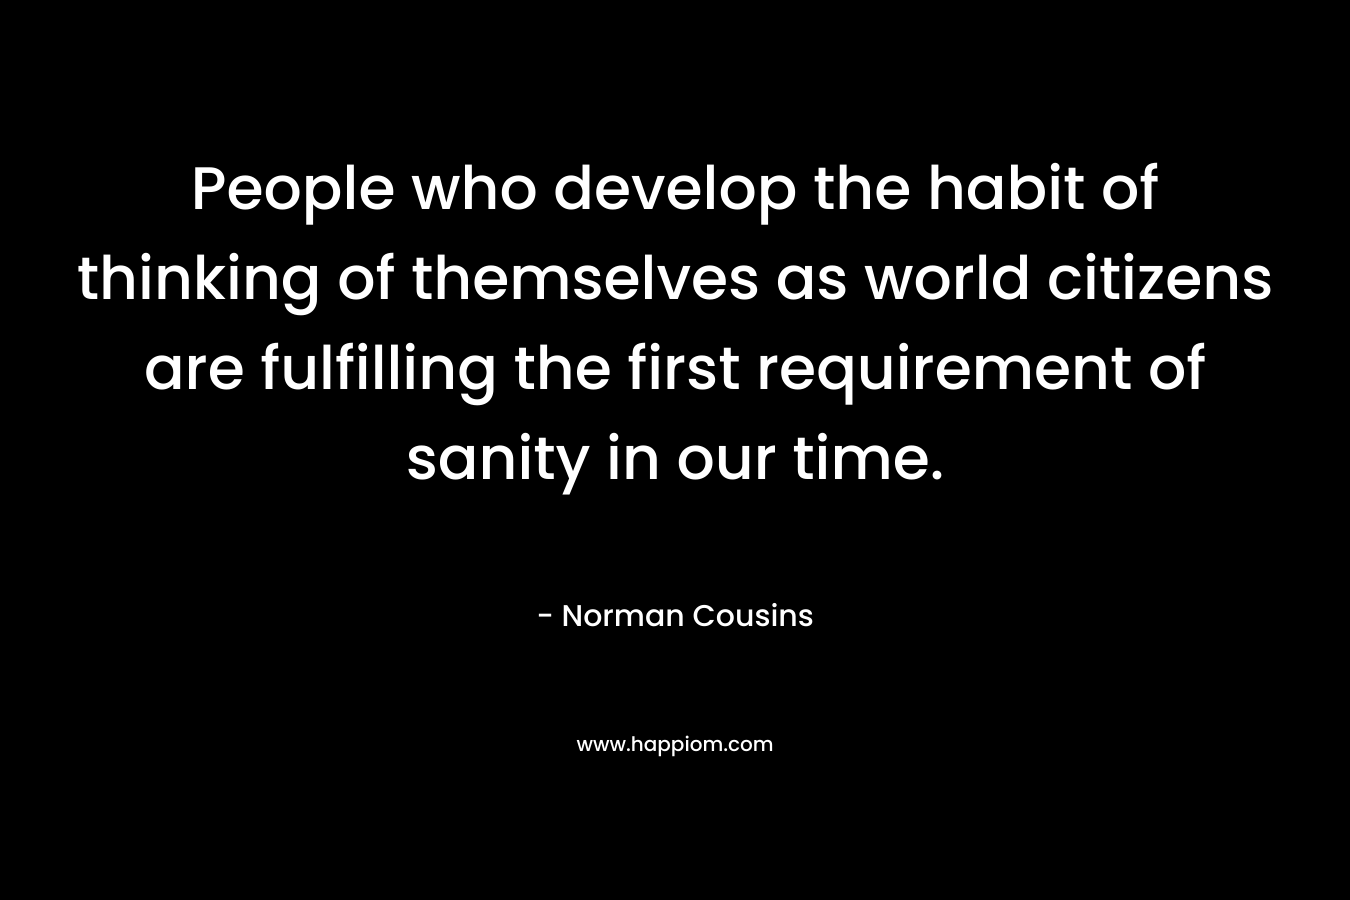 People who develop the habit of thinking of themselves as world citizens are fulfilling the first requirement of sanity in our time.